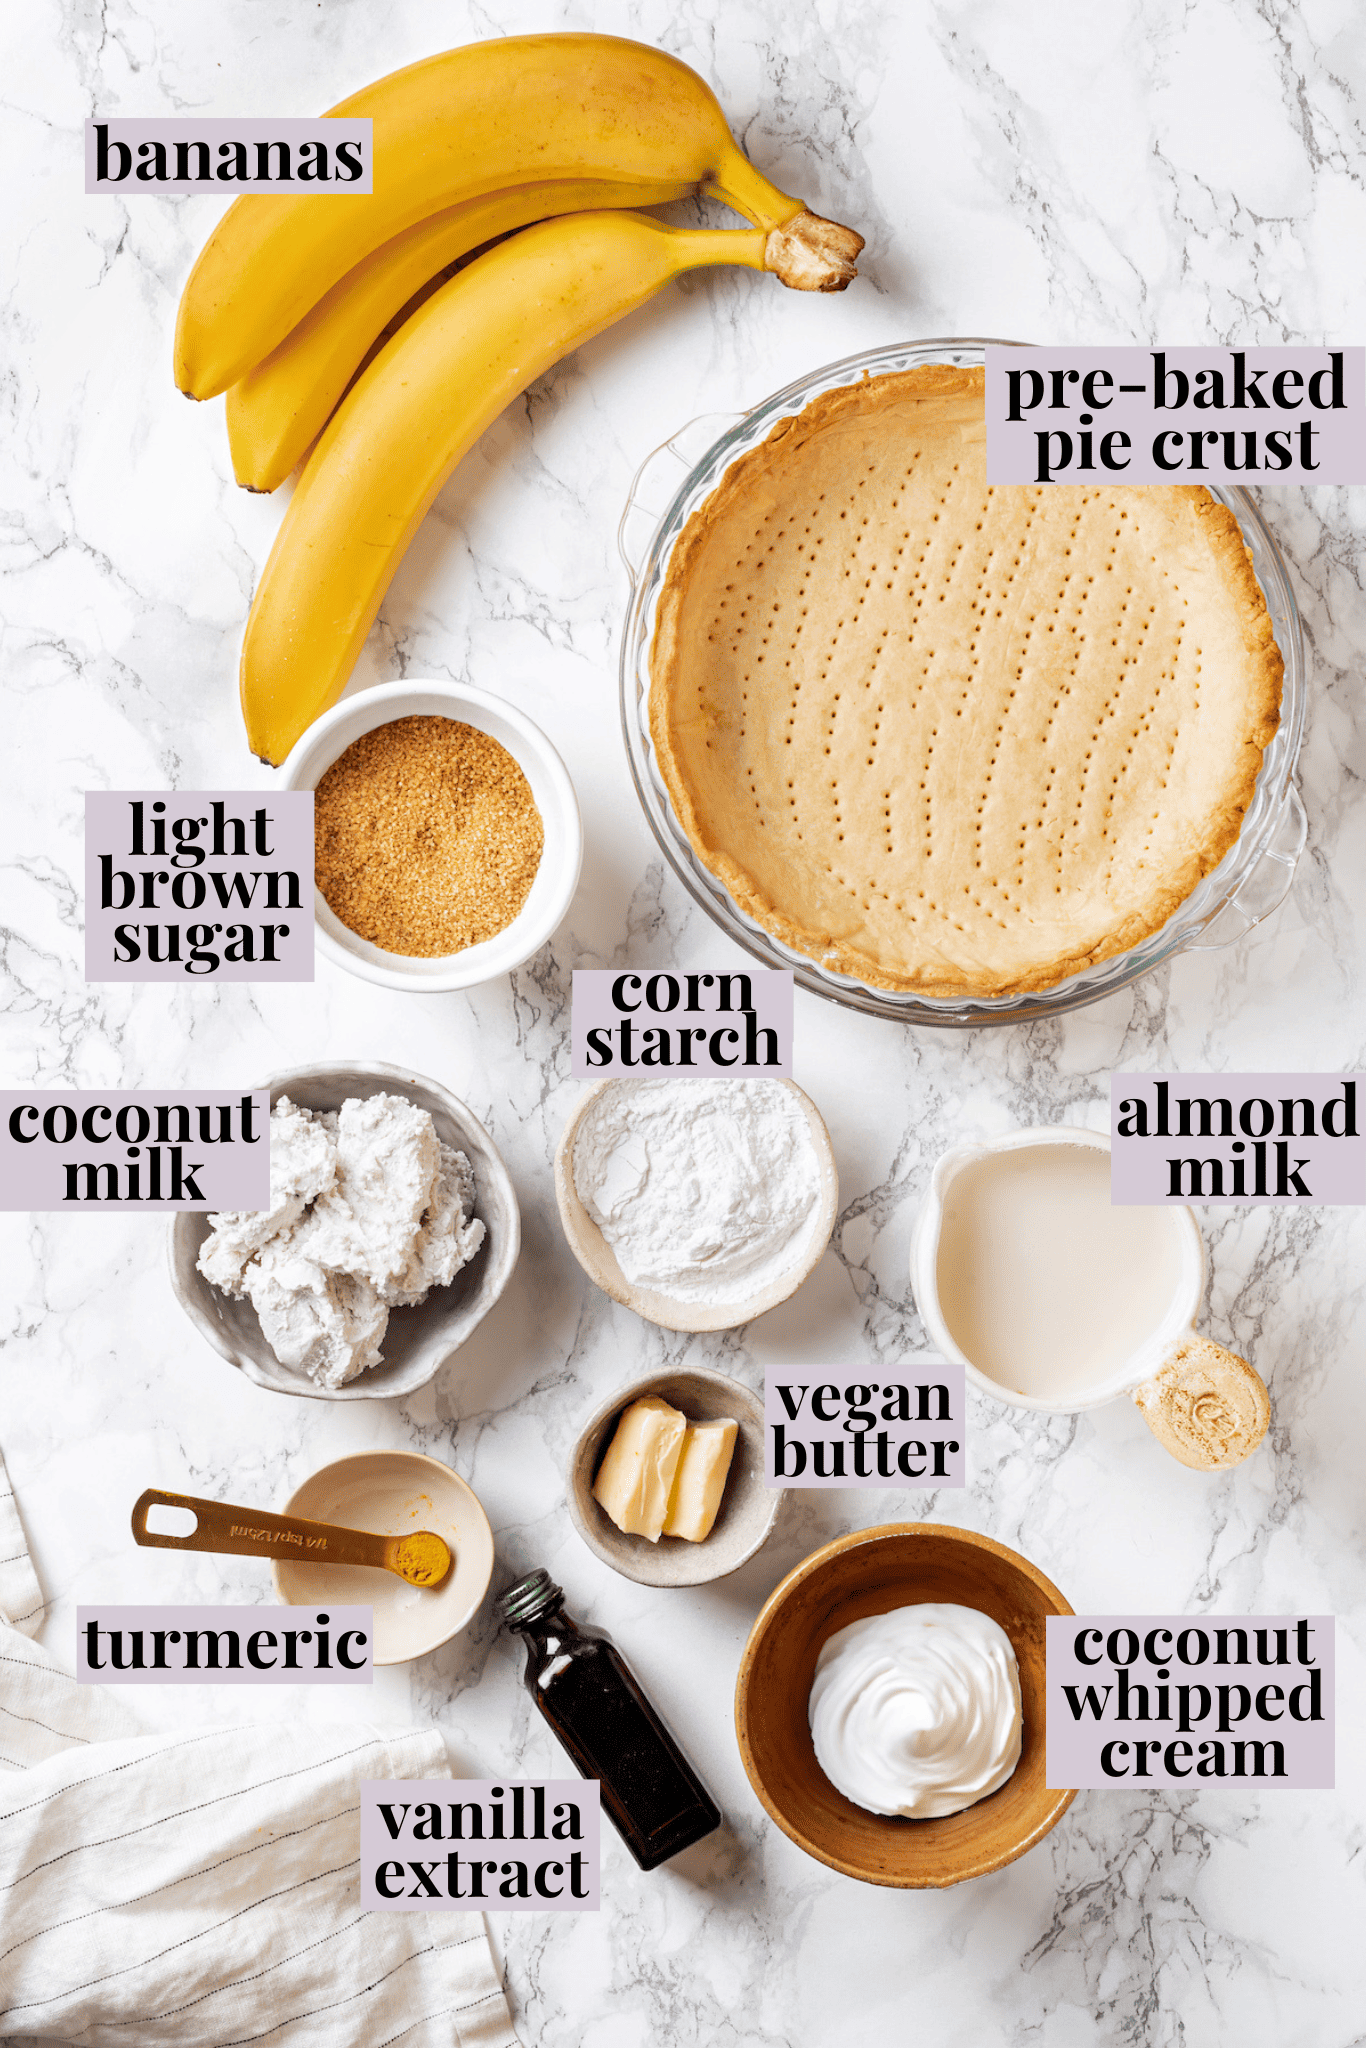 Overhead view of ingredients for banana cream pie with labels